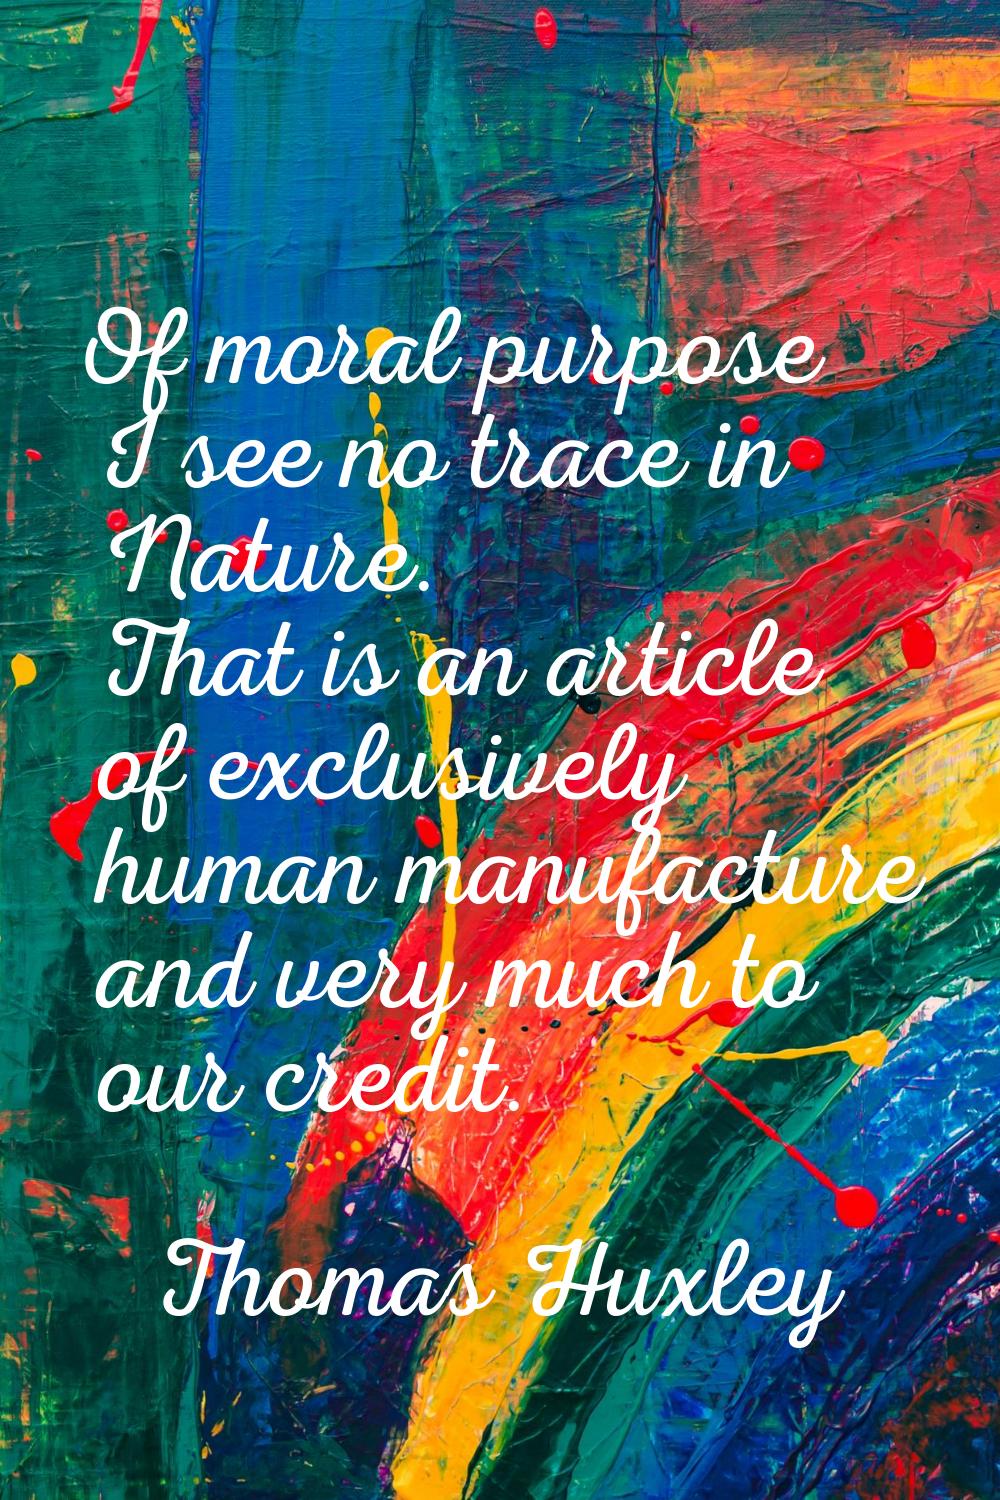 Of moral purpose I see no trace in Nature. That is an article of exclusively human manufacture and 